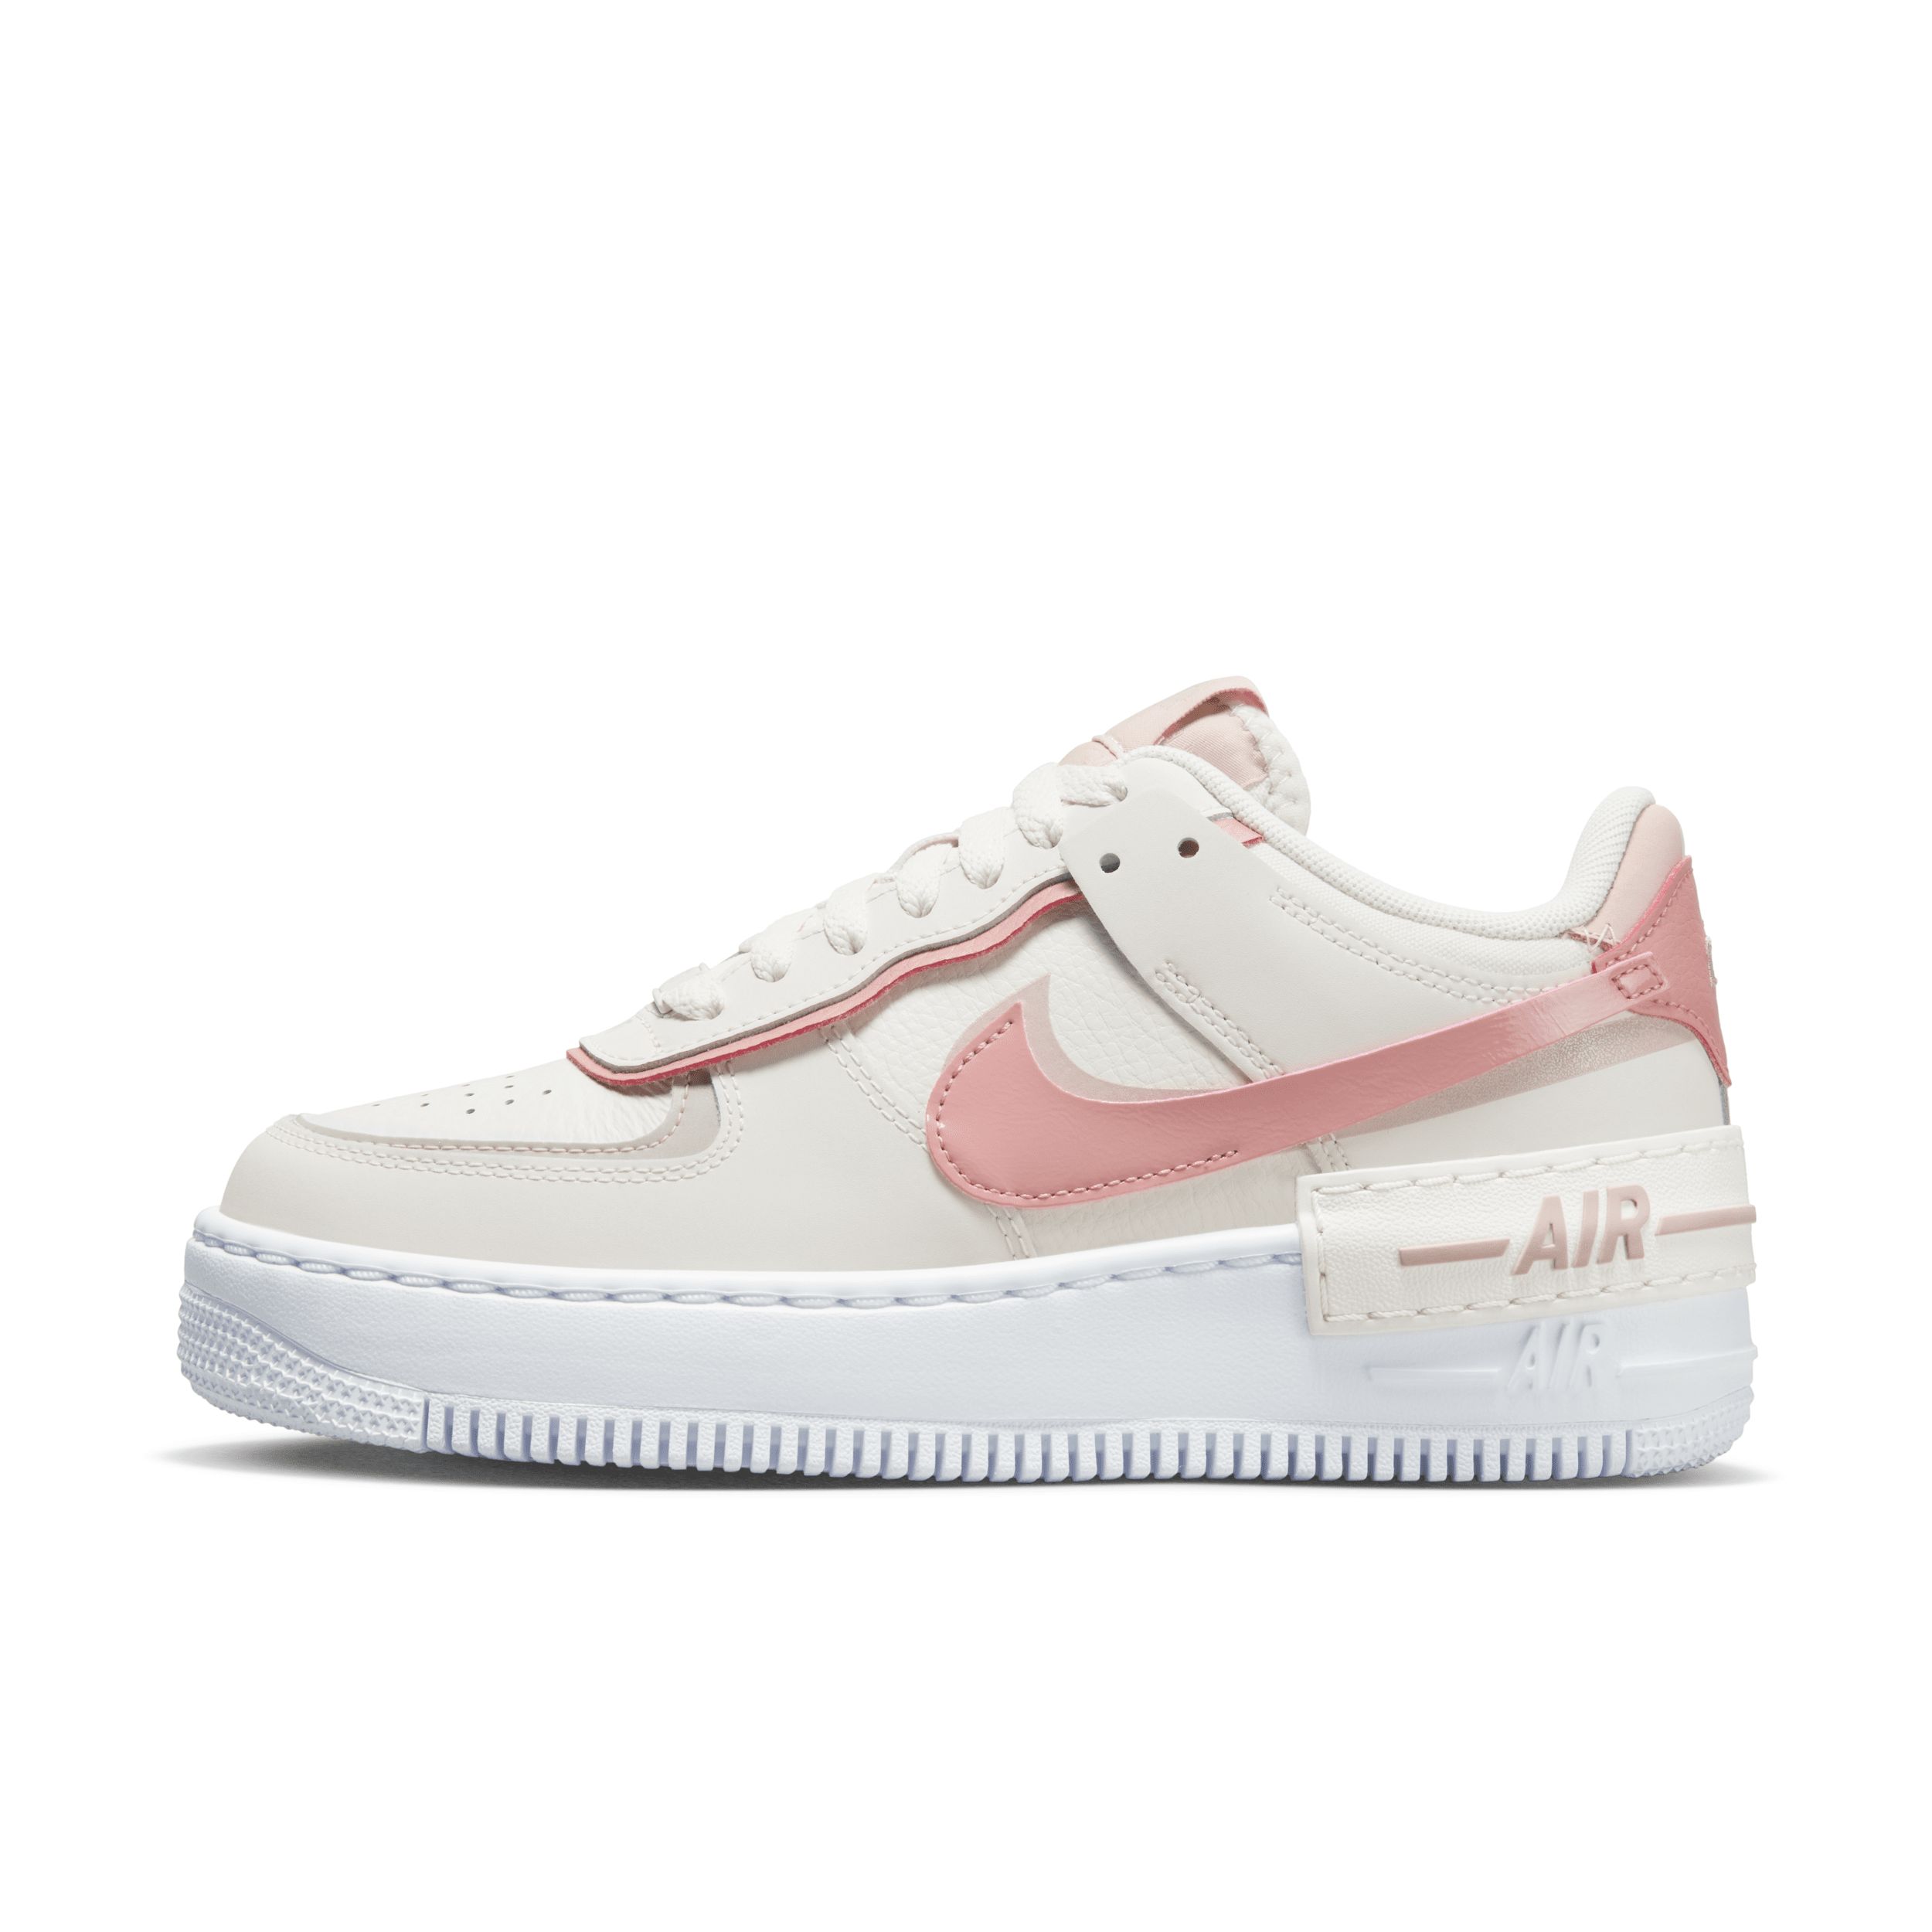 Nike Women's Air Force 1 Shadow Shoes in Grey, Size: 8 | DZ1847-001 | Nike (US)